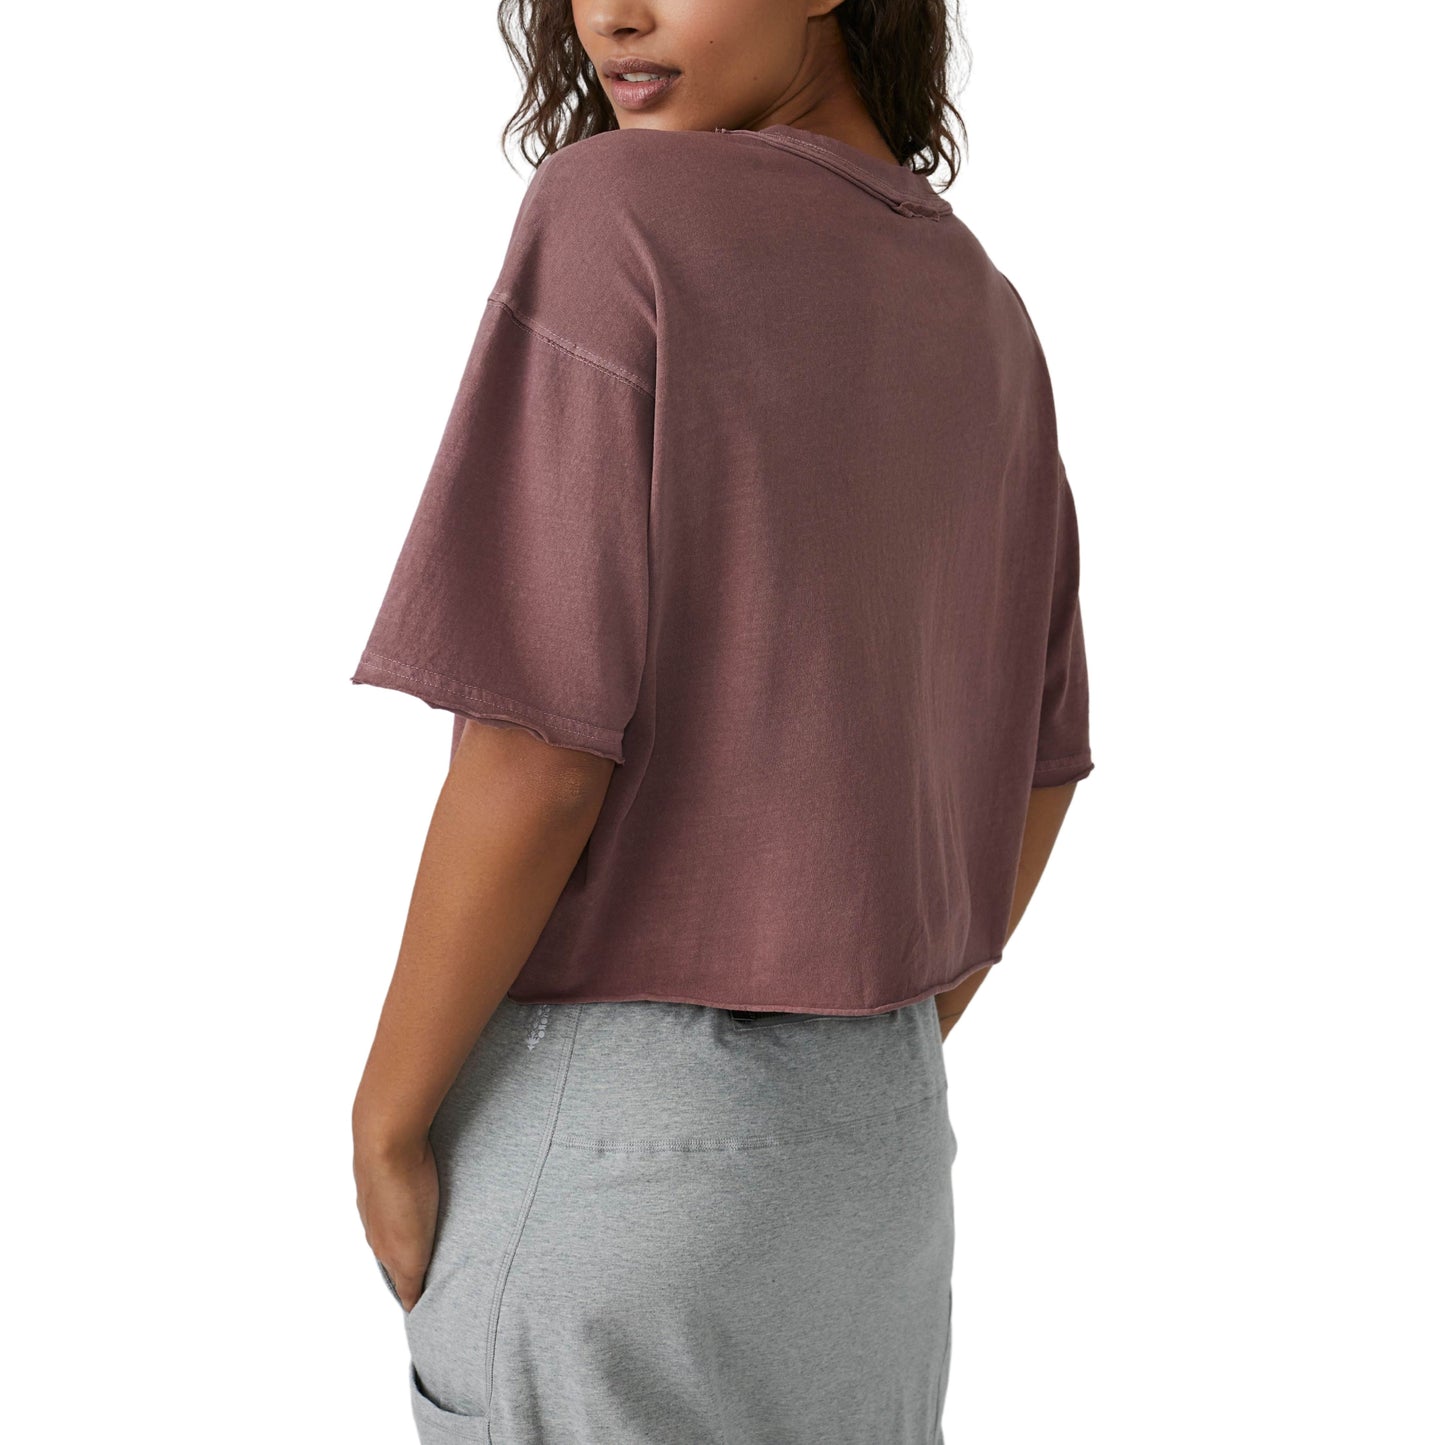 Back view of a woman wearing an oversized boxy fit Wild Mustang Inspire Tee in muted purple and light grey pants, focusing on the shirt's design and fit by Free People Movement.